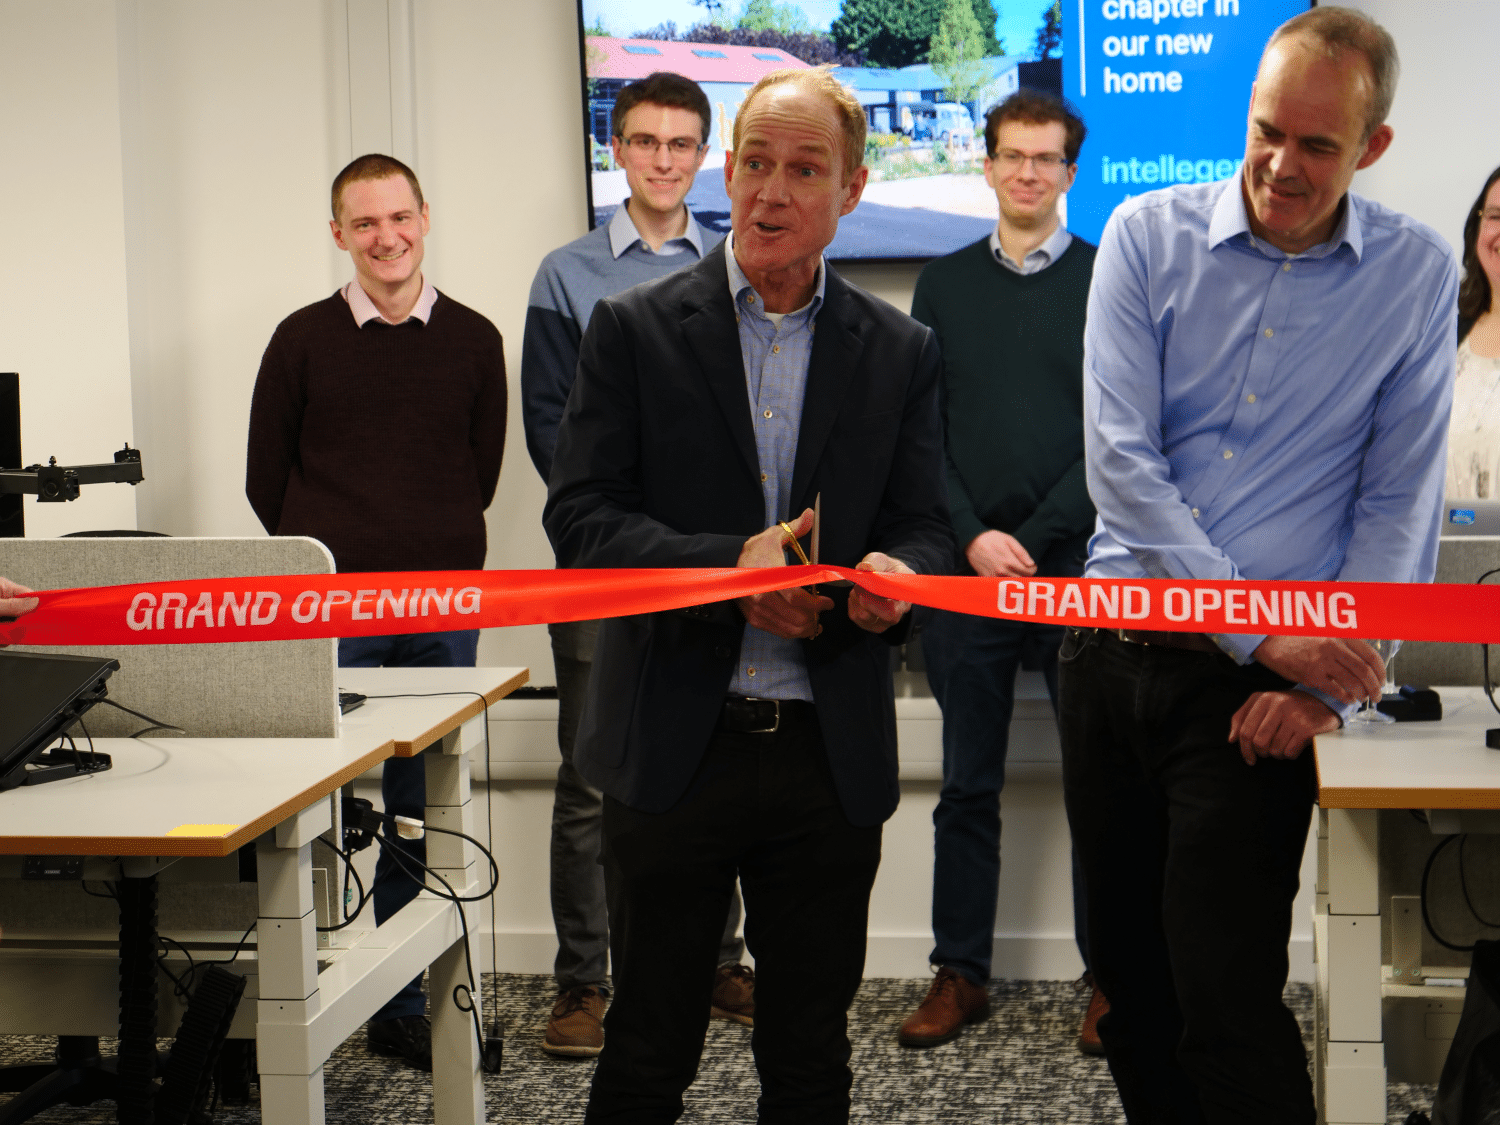 Intellegens board member Graham Snudden cuts the ribbon at the office opening together with CEO Ben Pellegrini